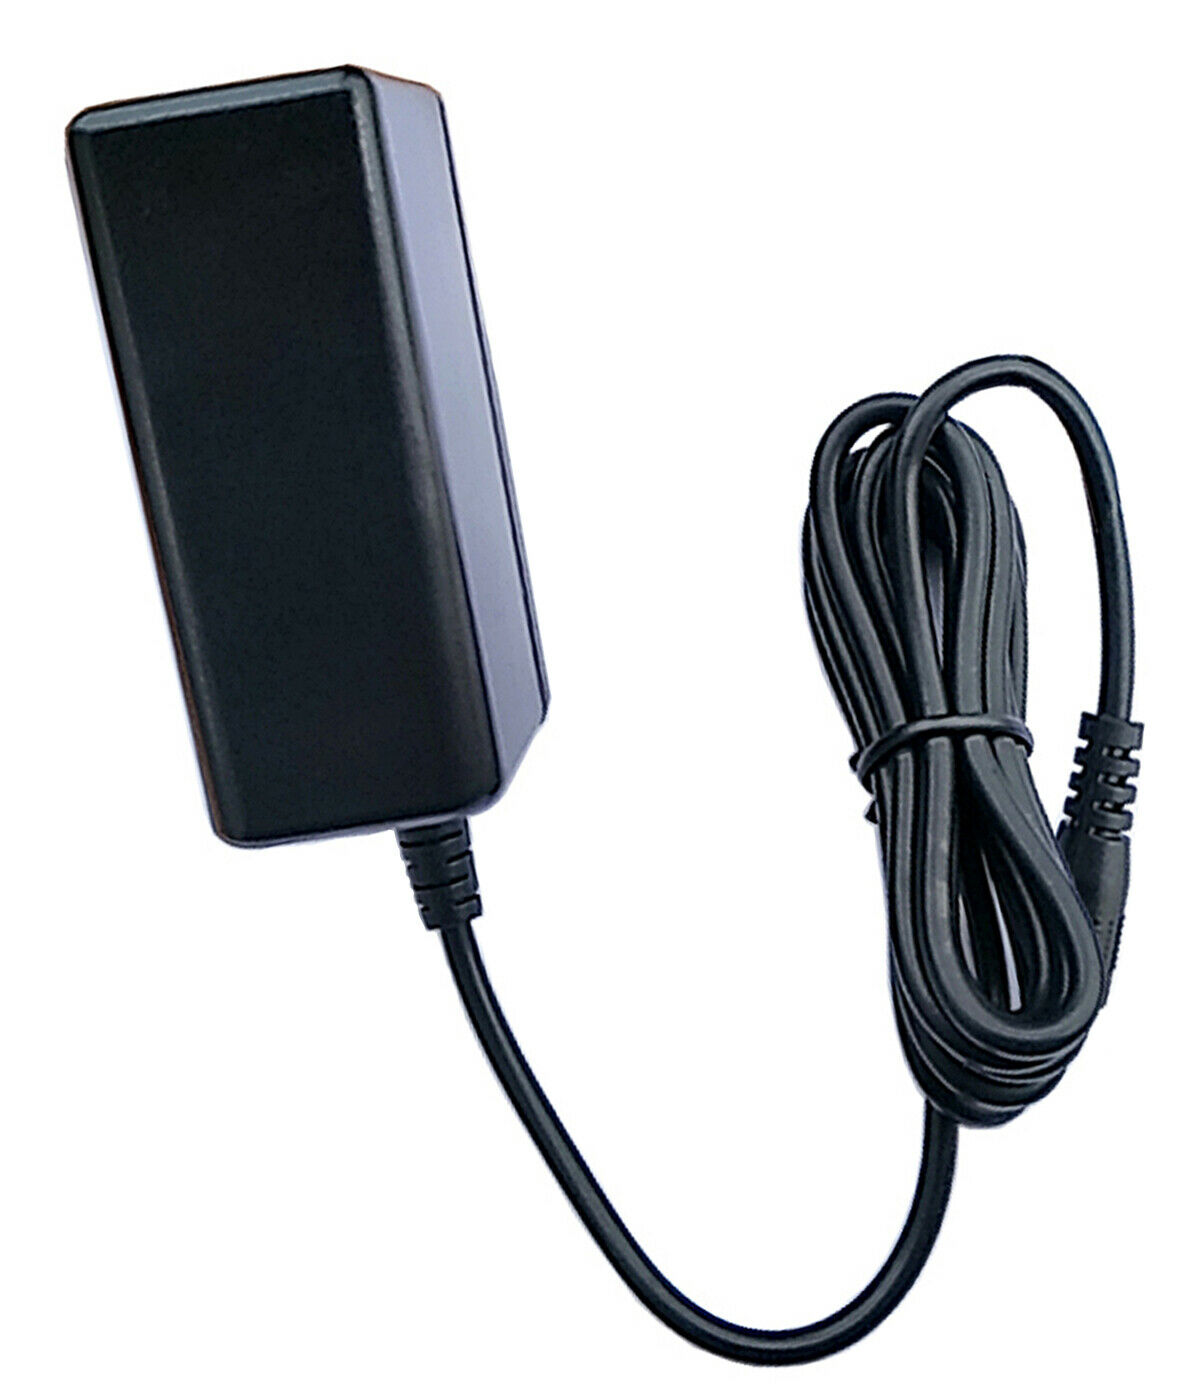 AC Adapter for Tascam PS-P520 DP-008 MPGT1 CDGT2 DR1 DR-07 CD-GT2 CD-BT2 Brand: Unbranded Type: Adapter Output Vol